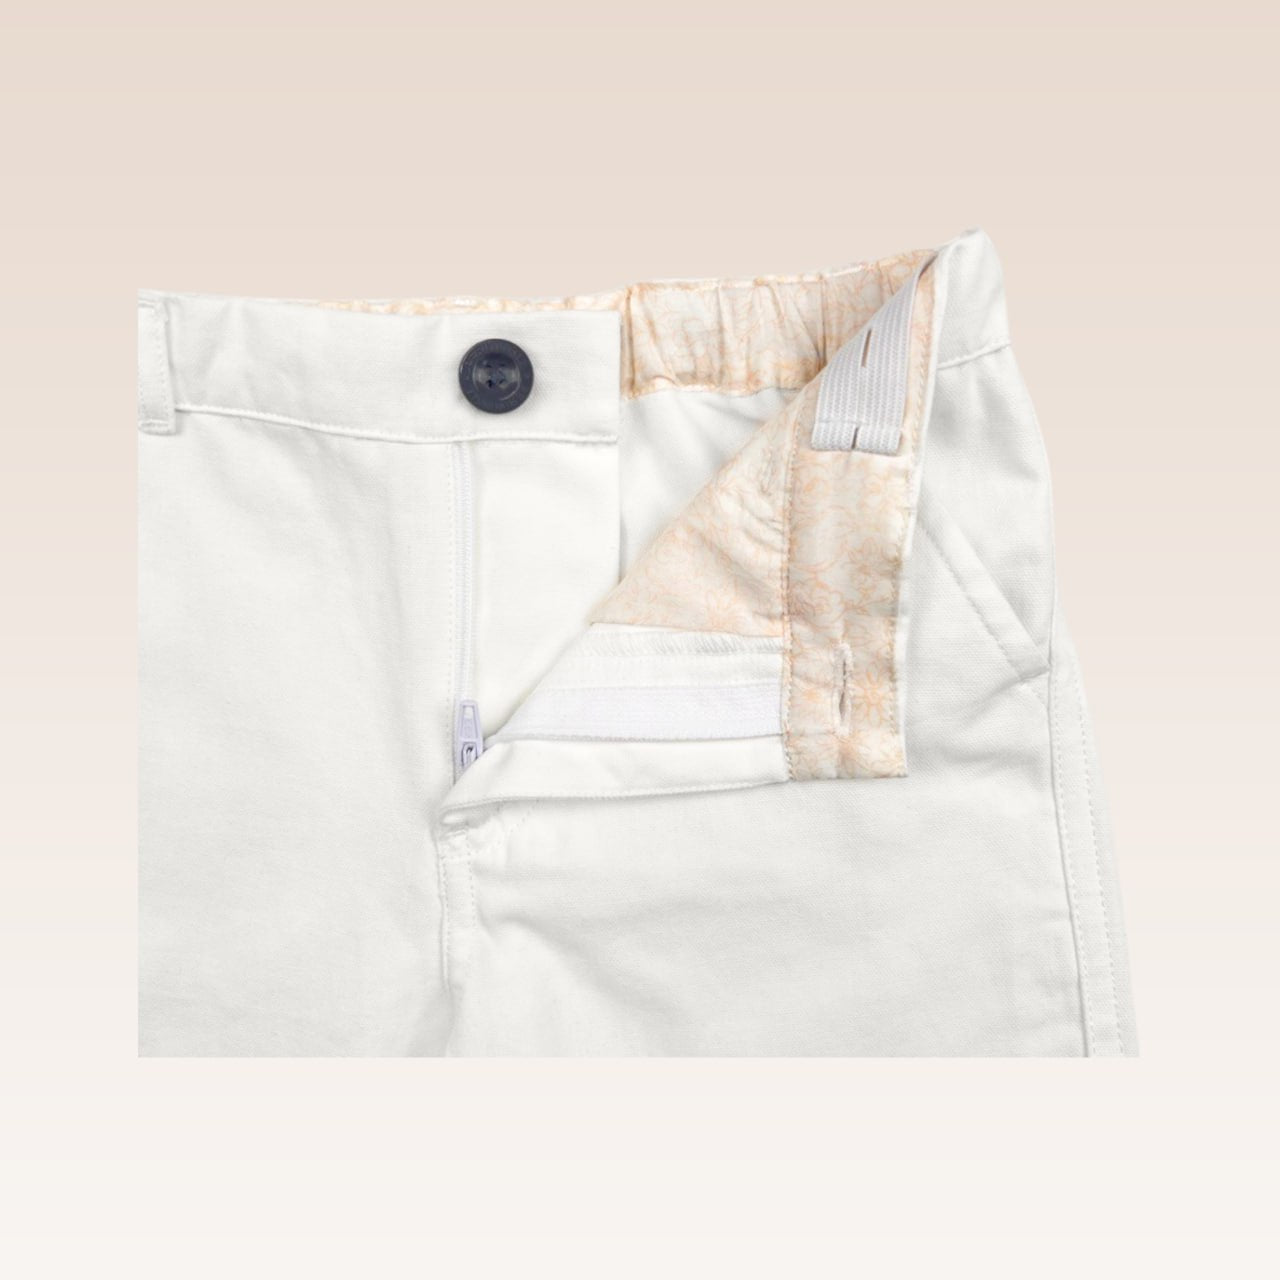 Mateo Boys White Slim Fit Shorts with Pockets